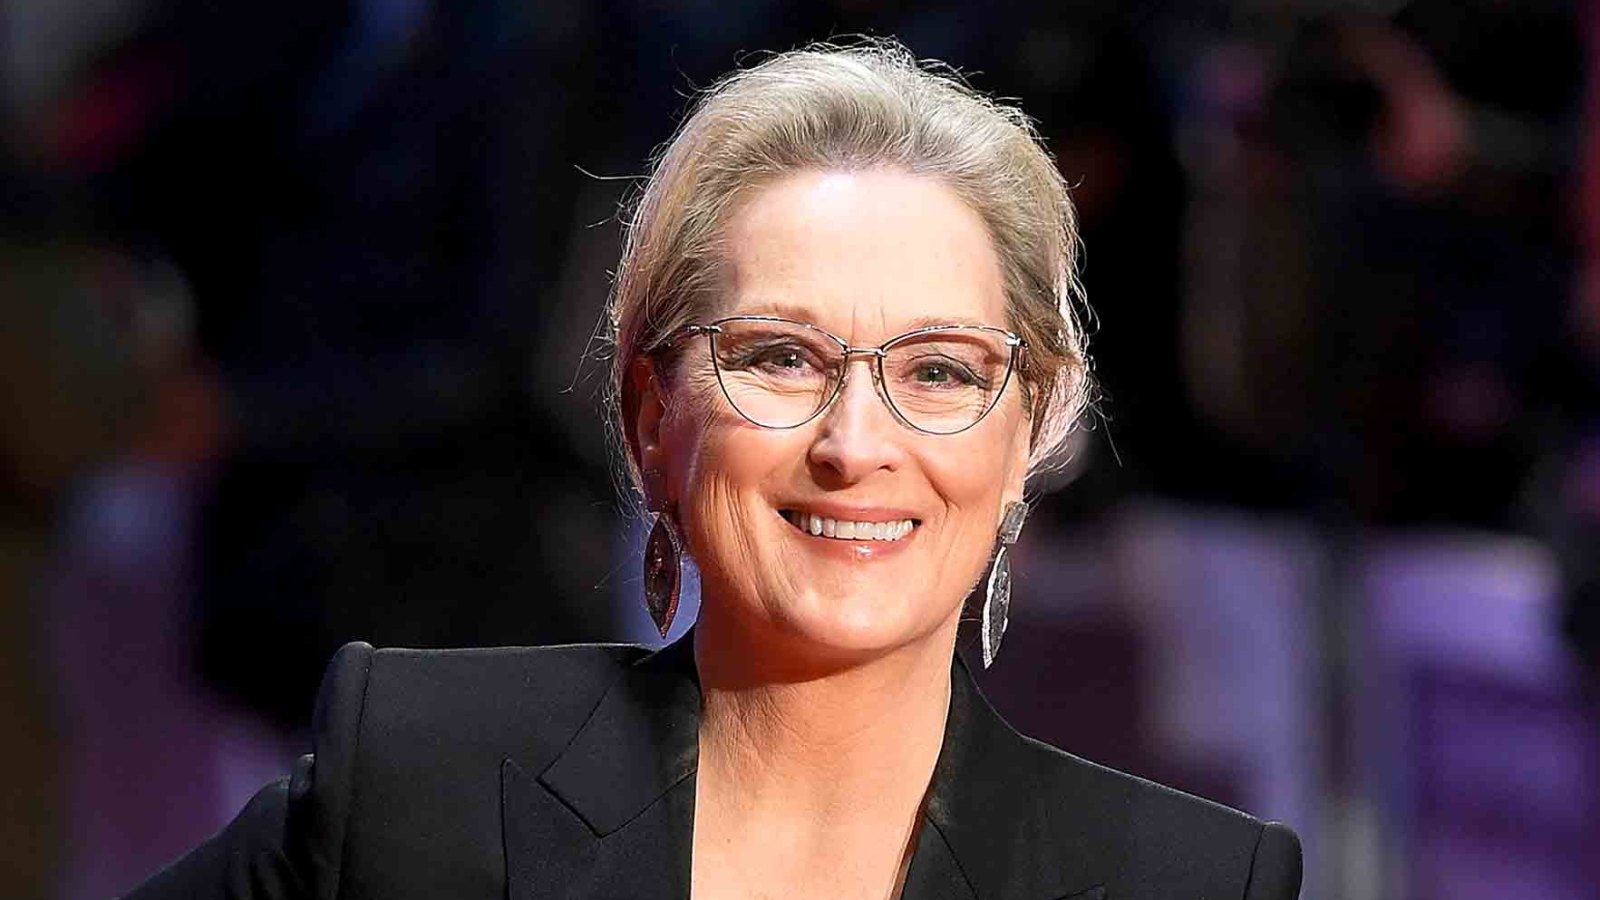 Meryl Streep attends 'The Post' European 2018 Premeire at Odeon Leicester Square in London, England.